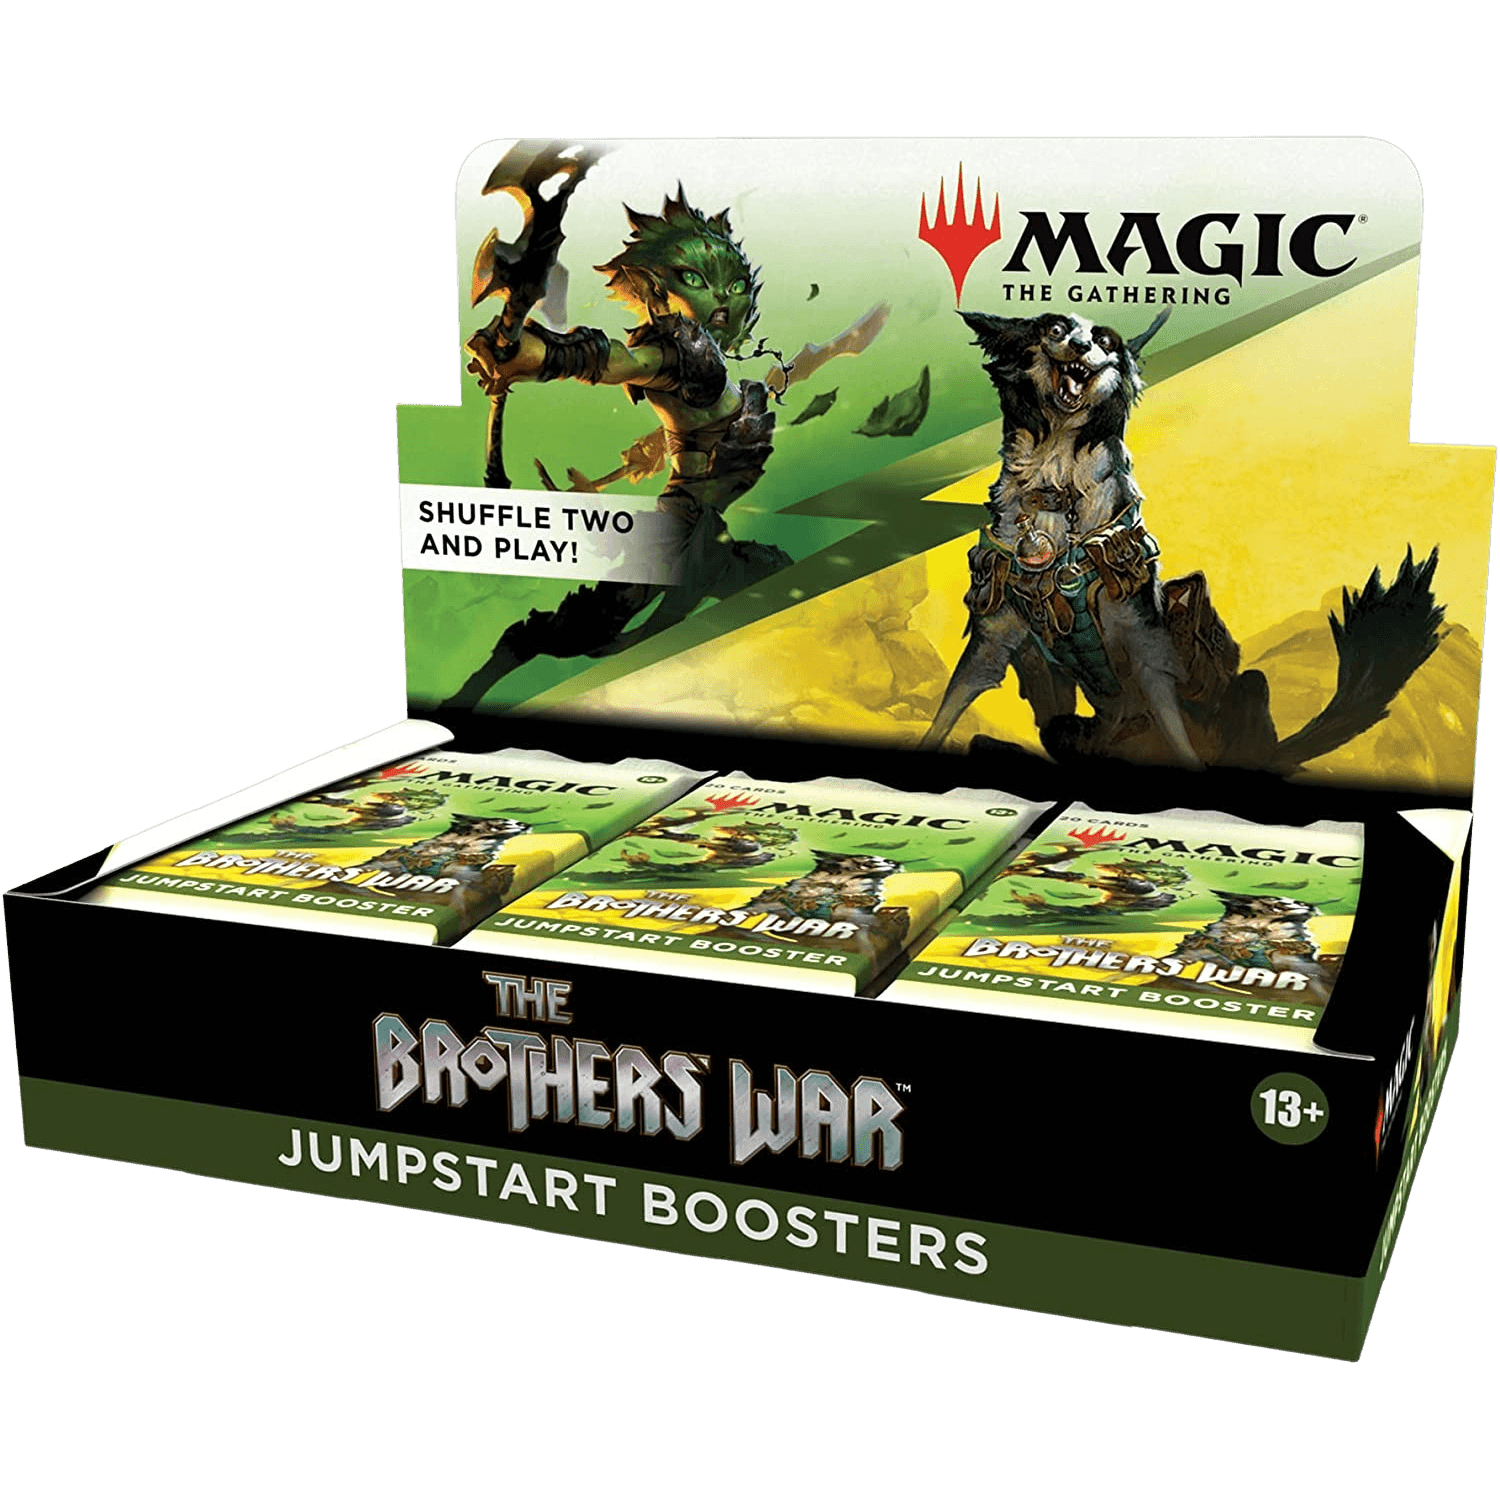 Magic: The Gathering - The Brothers War Jumpstart Booster Box (18 Packs) - The Card Vault